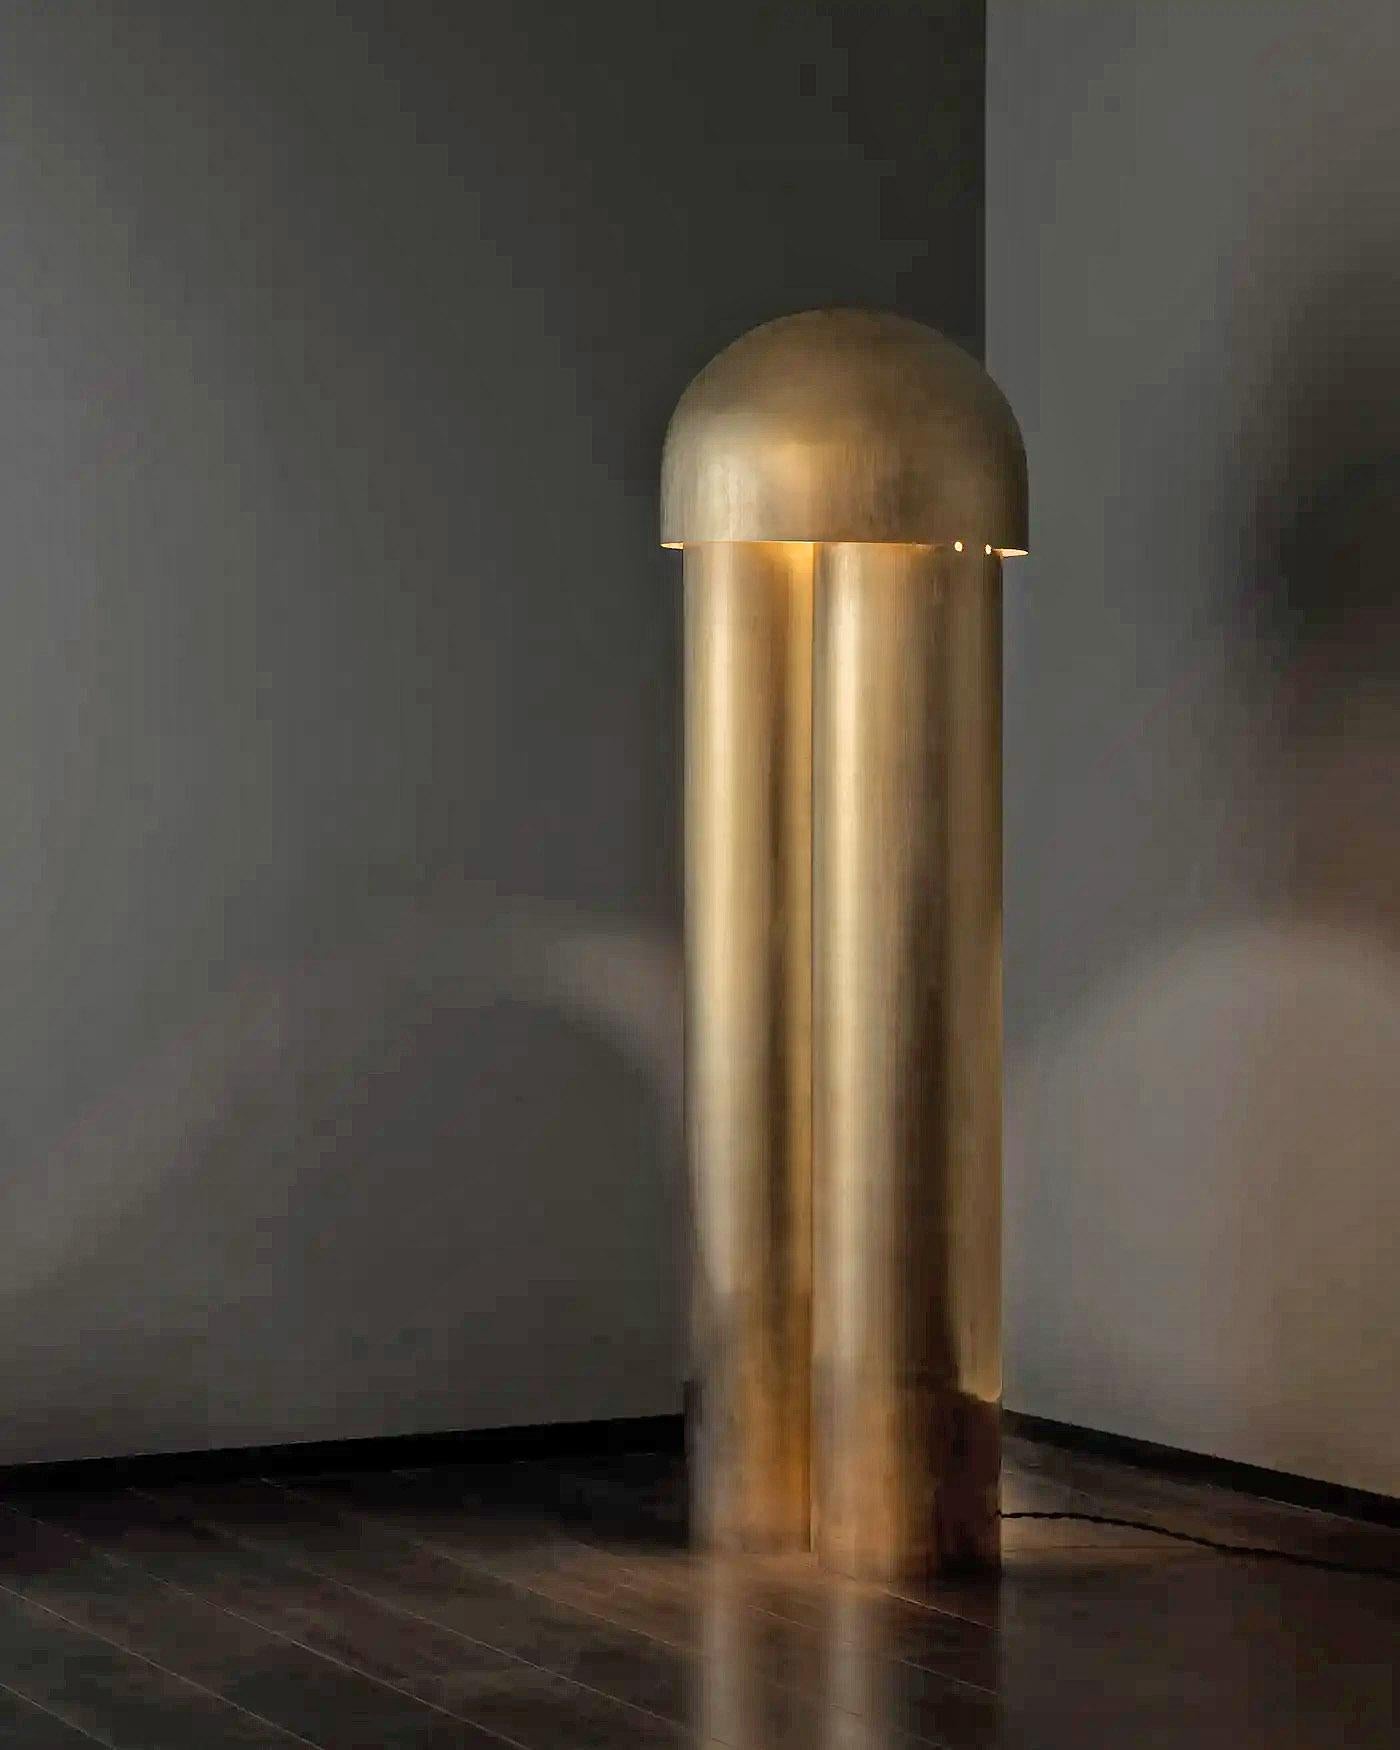 Contemporary Aged Brass Sculpted Floor Lamp, Monolith by Paul Matter

The Monolith lamp is an exercise in reduction. Sculpted out of a single body with the help of simple scores and folds, the lamps geometry, surface texture and finish of the